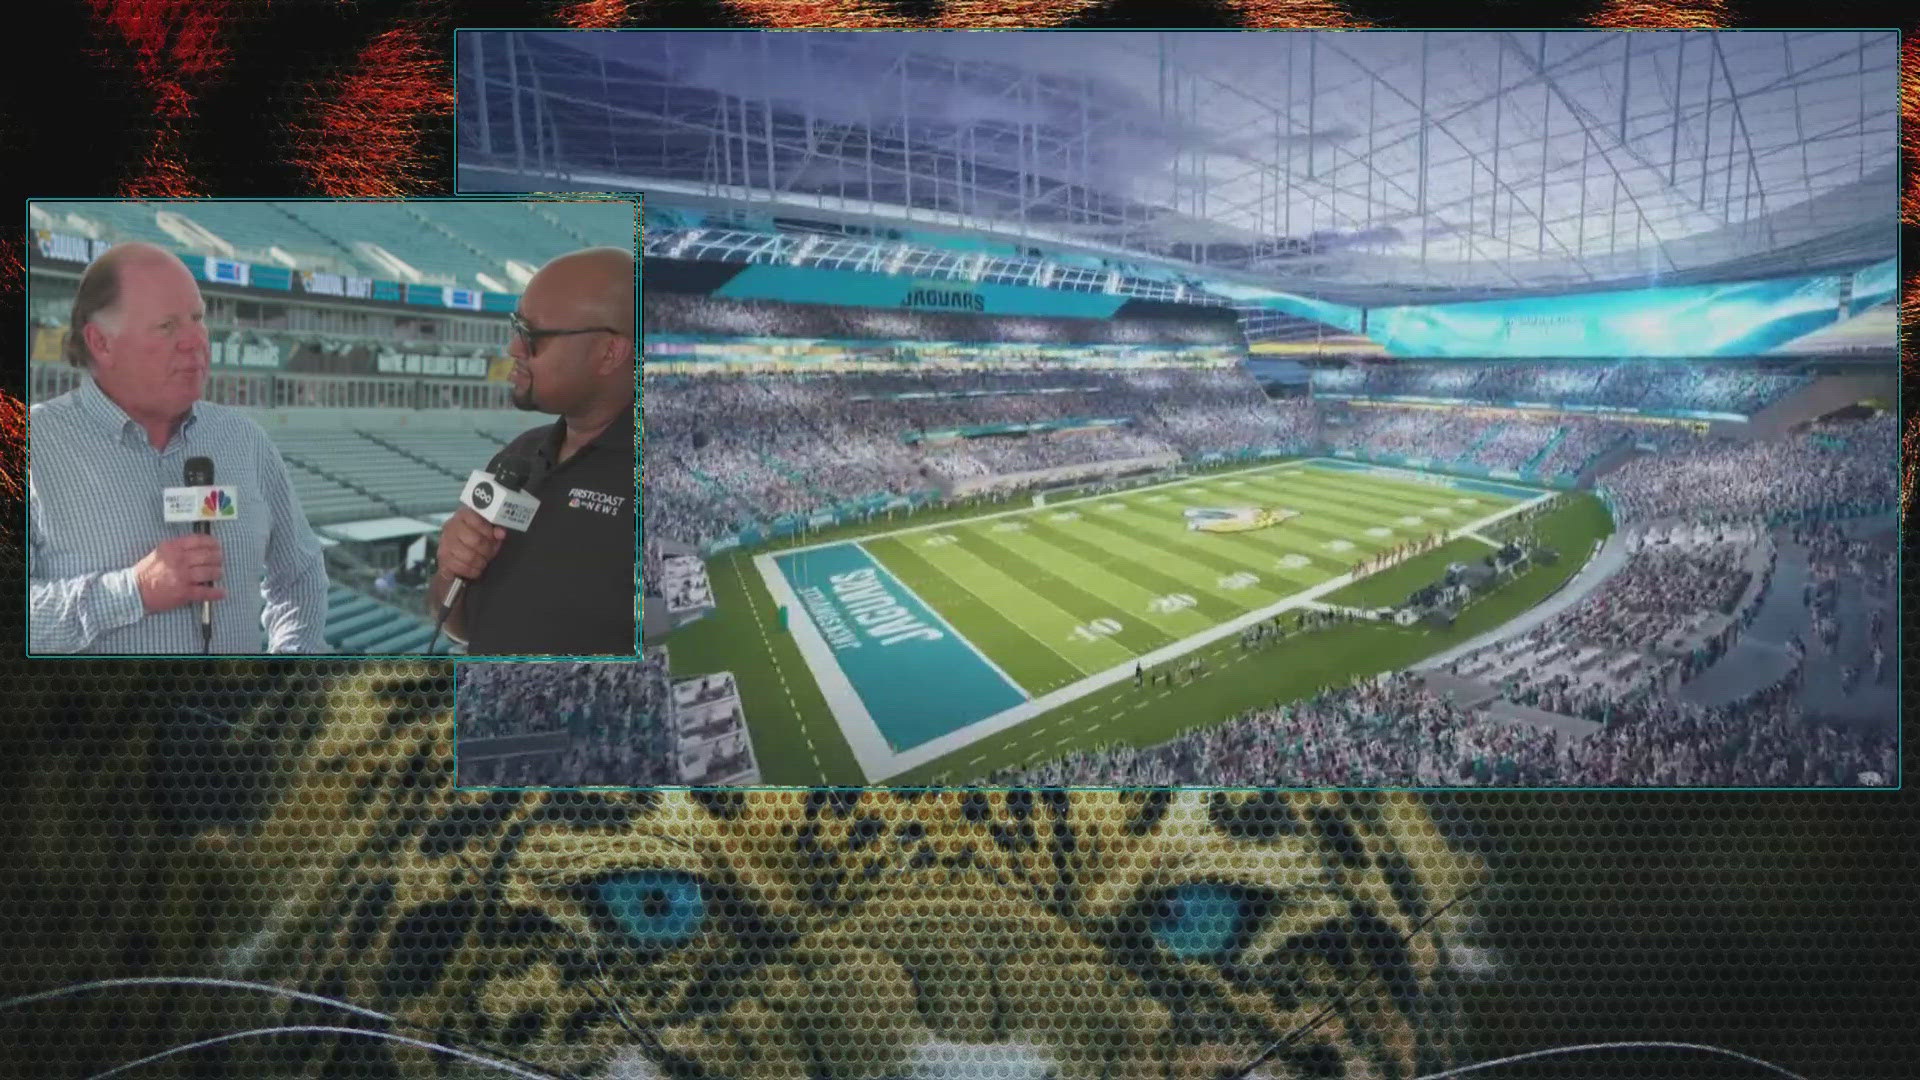 The Jaguars and fans are looking forward to pick No. 17.